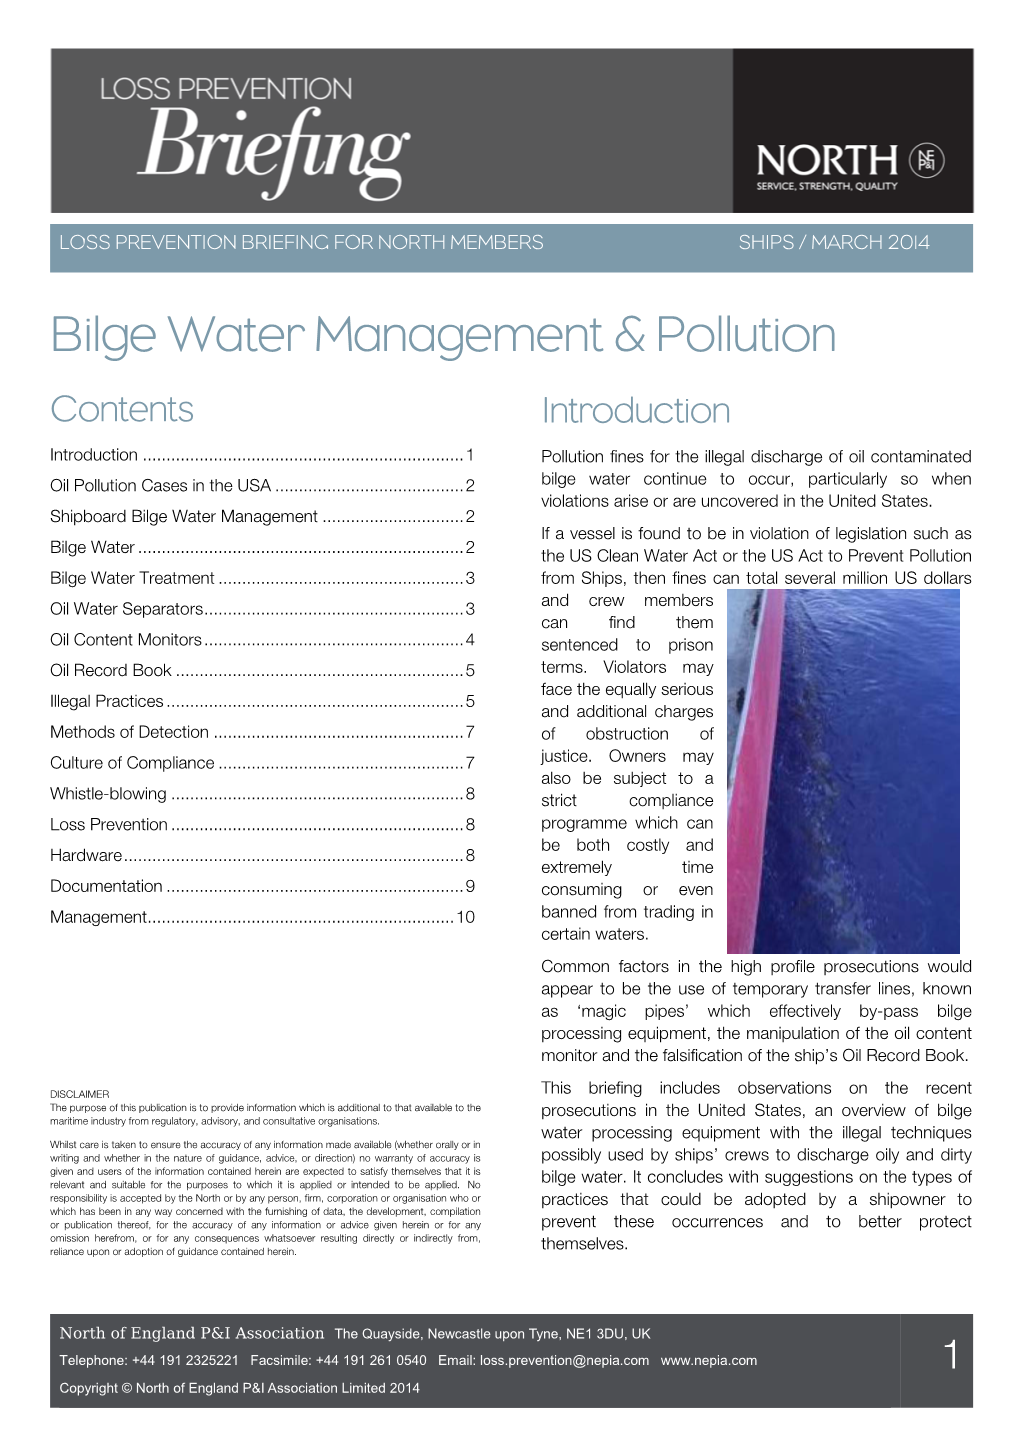 Bilge Water Management and Pollution